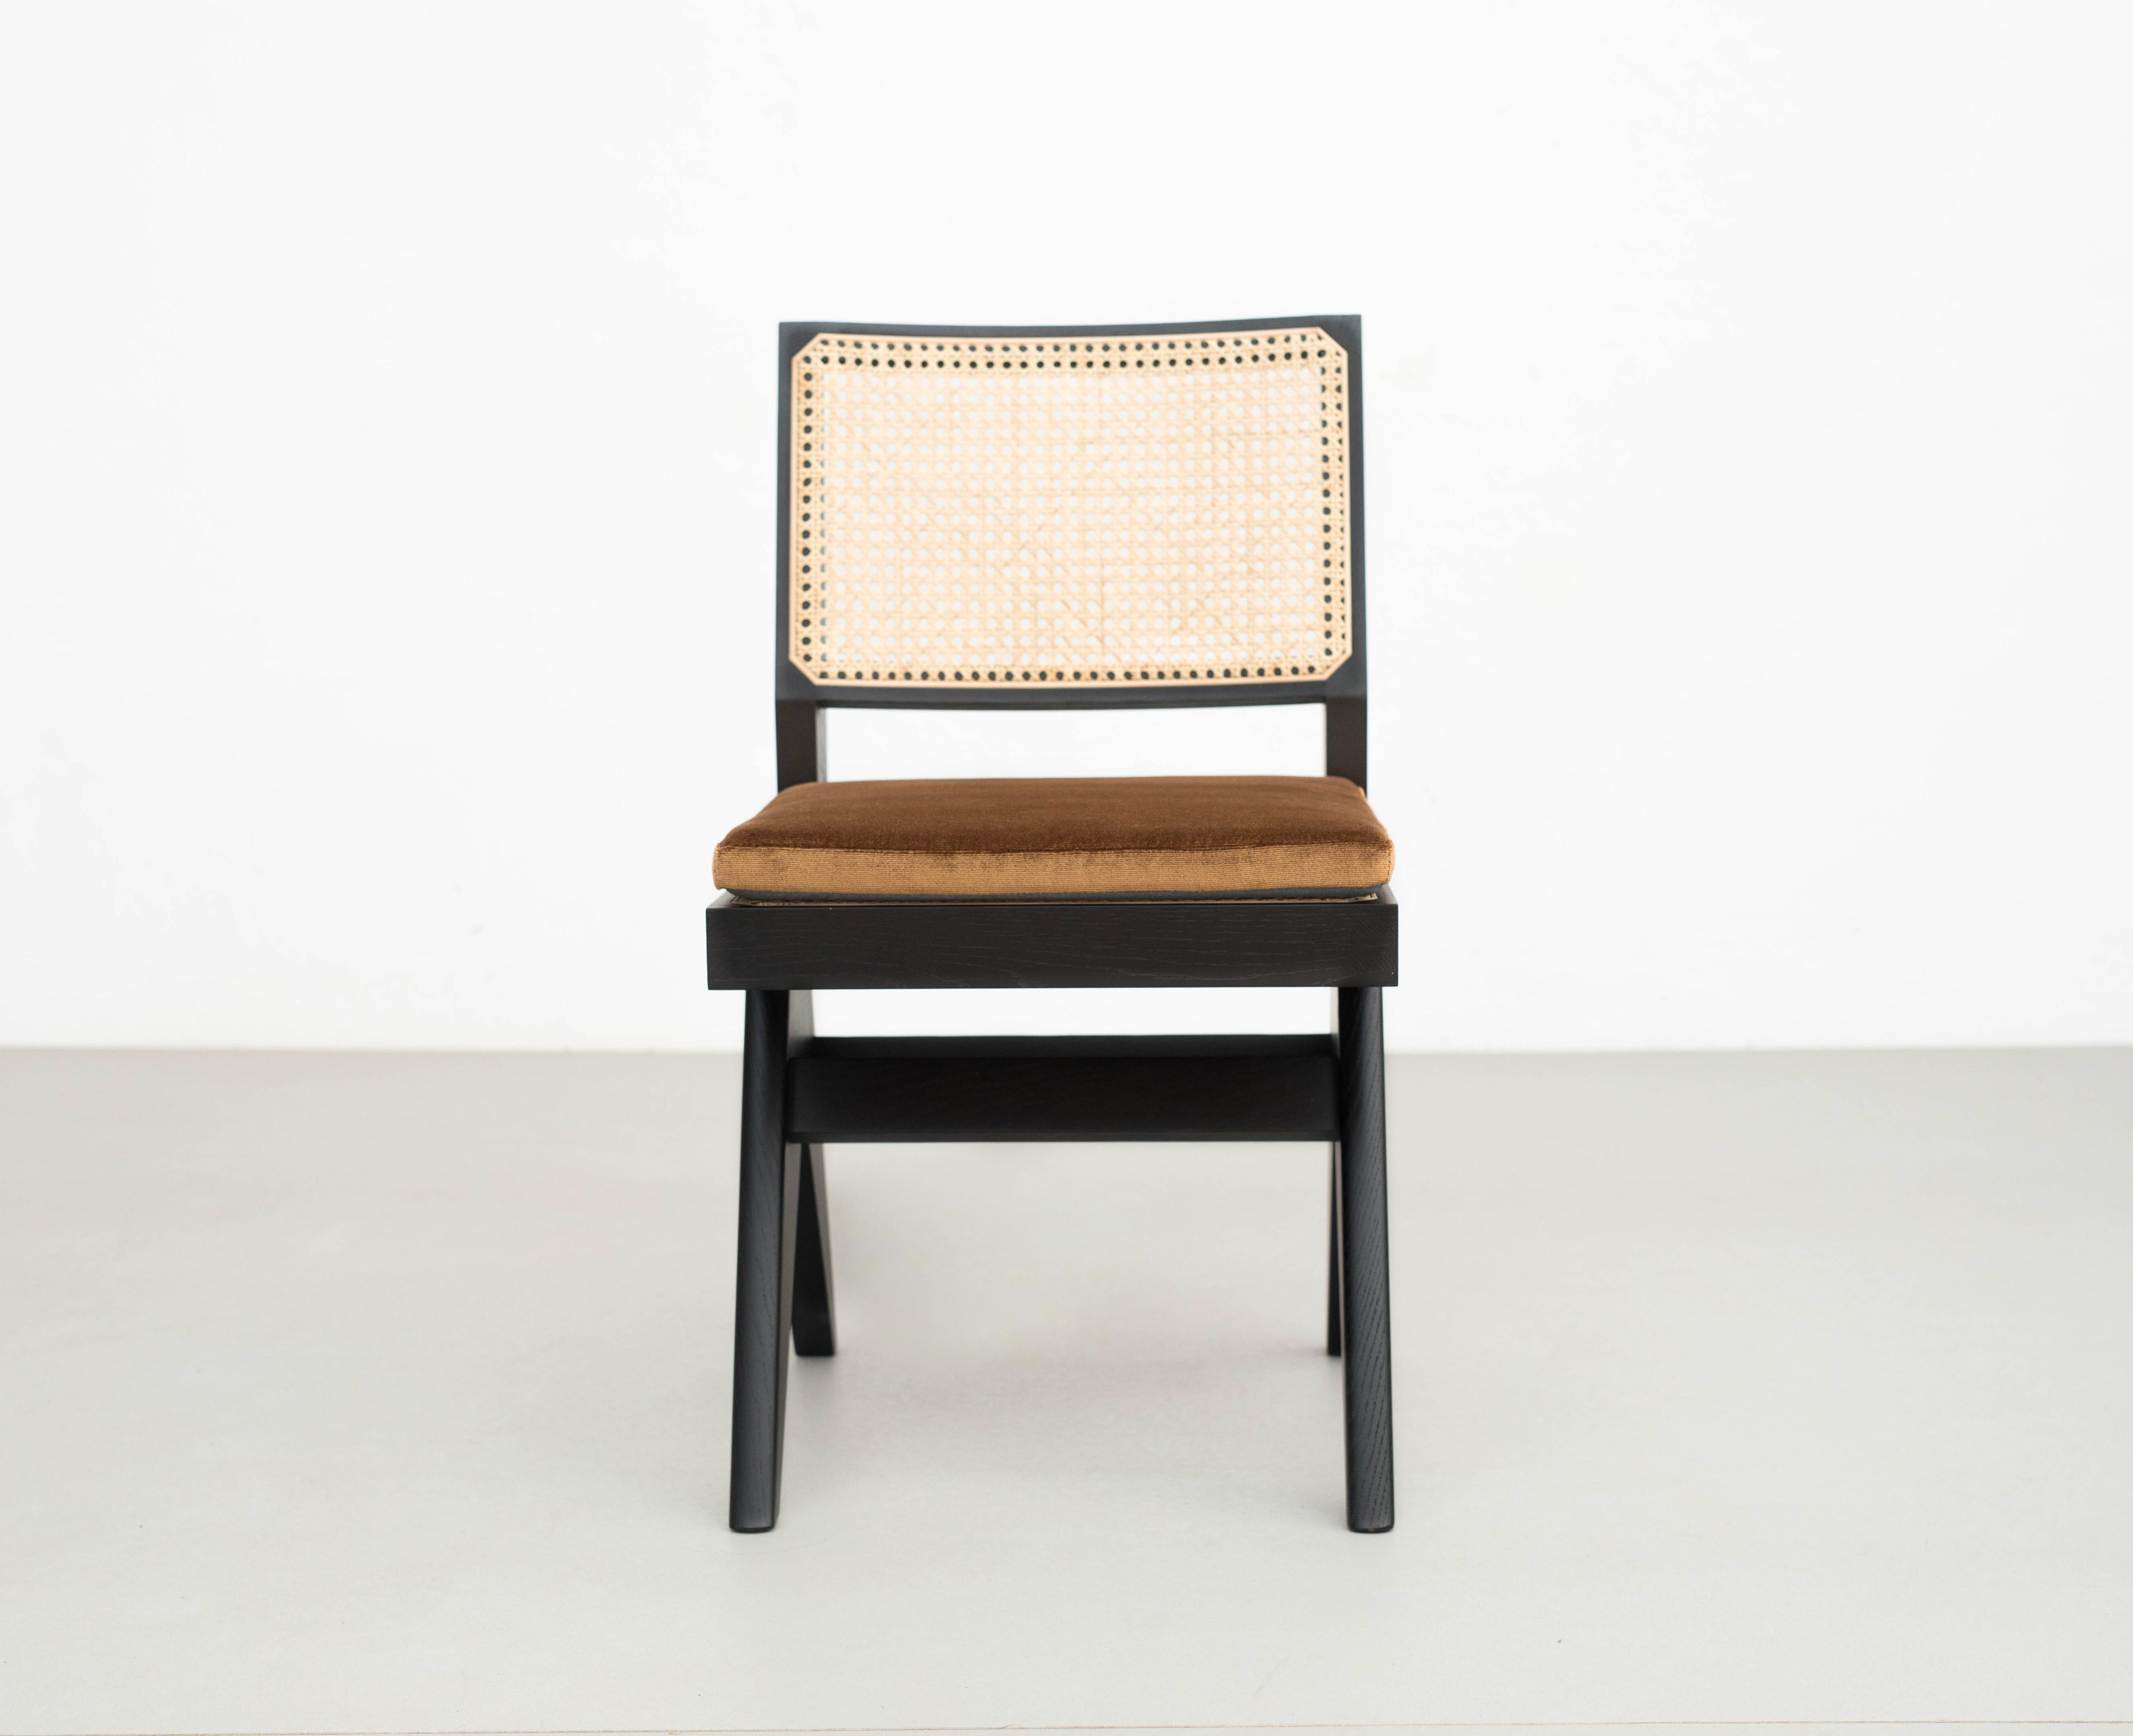 Chair designed by Pierre Jeanneret, circa 1950, relaunched in 2019.
Manufactured by Cassina in Italy.

This chair is one of the most recognisable in Chandigarh’s Capitol Complex, found throughout the offices of the Secretariat. The independent